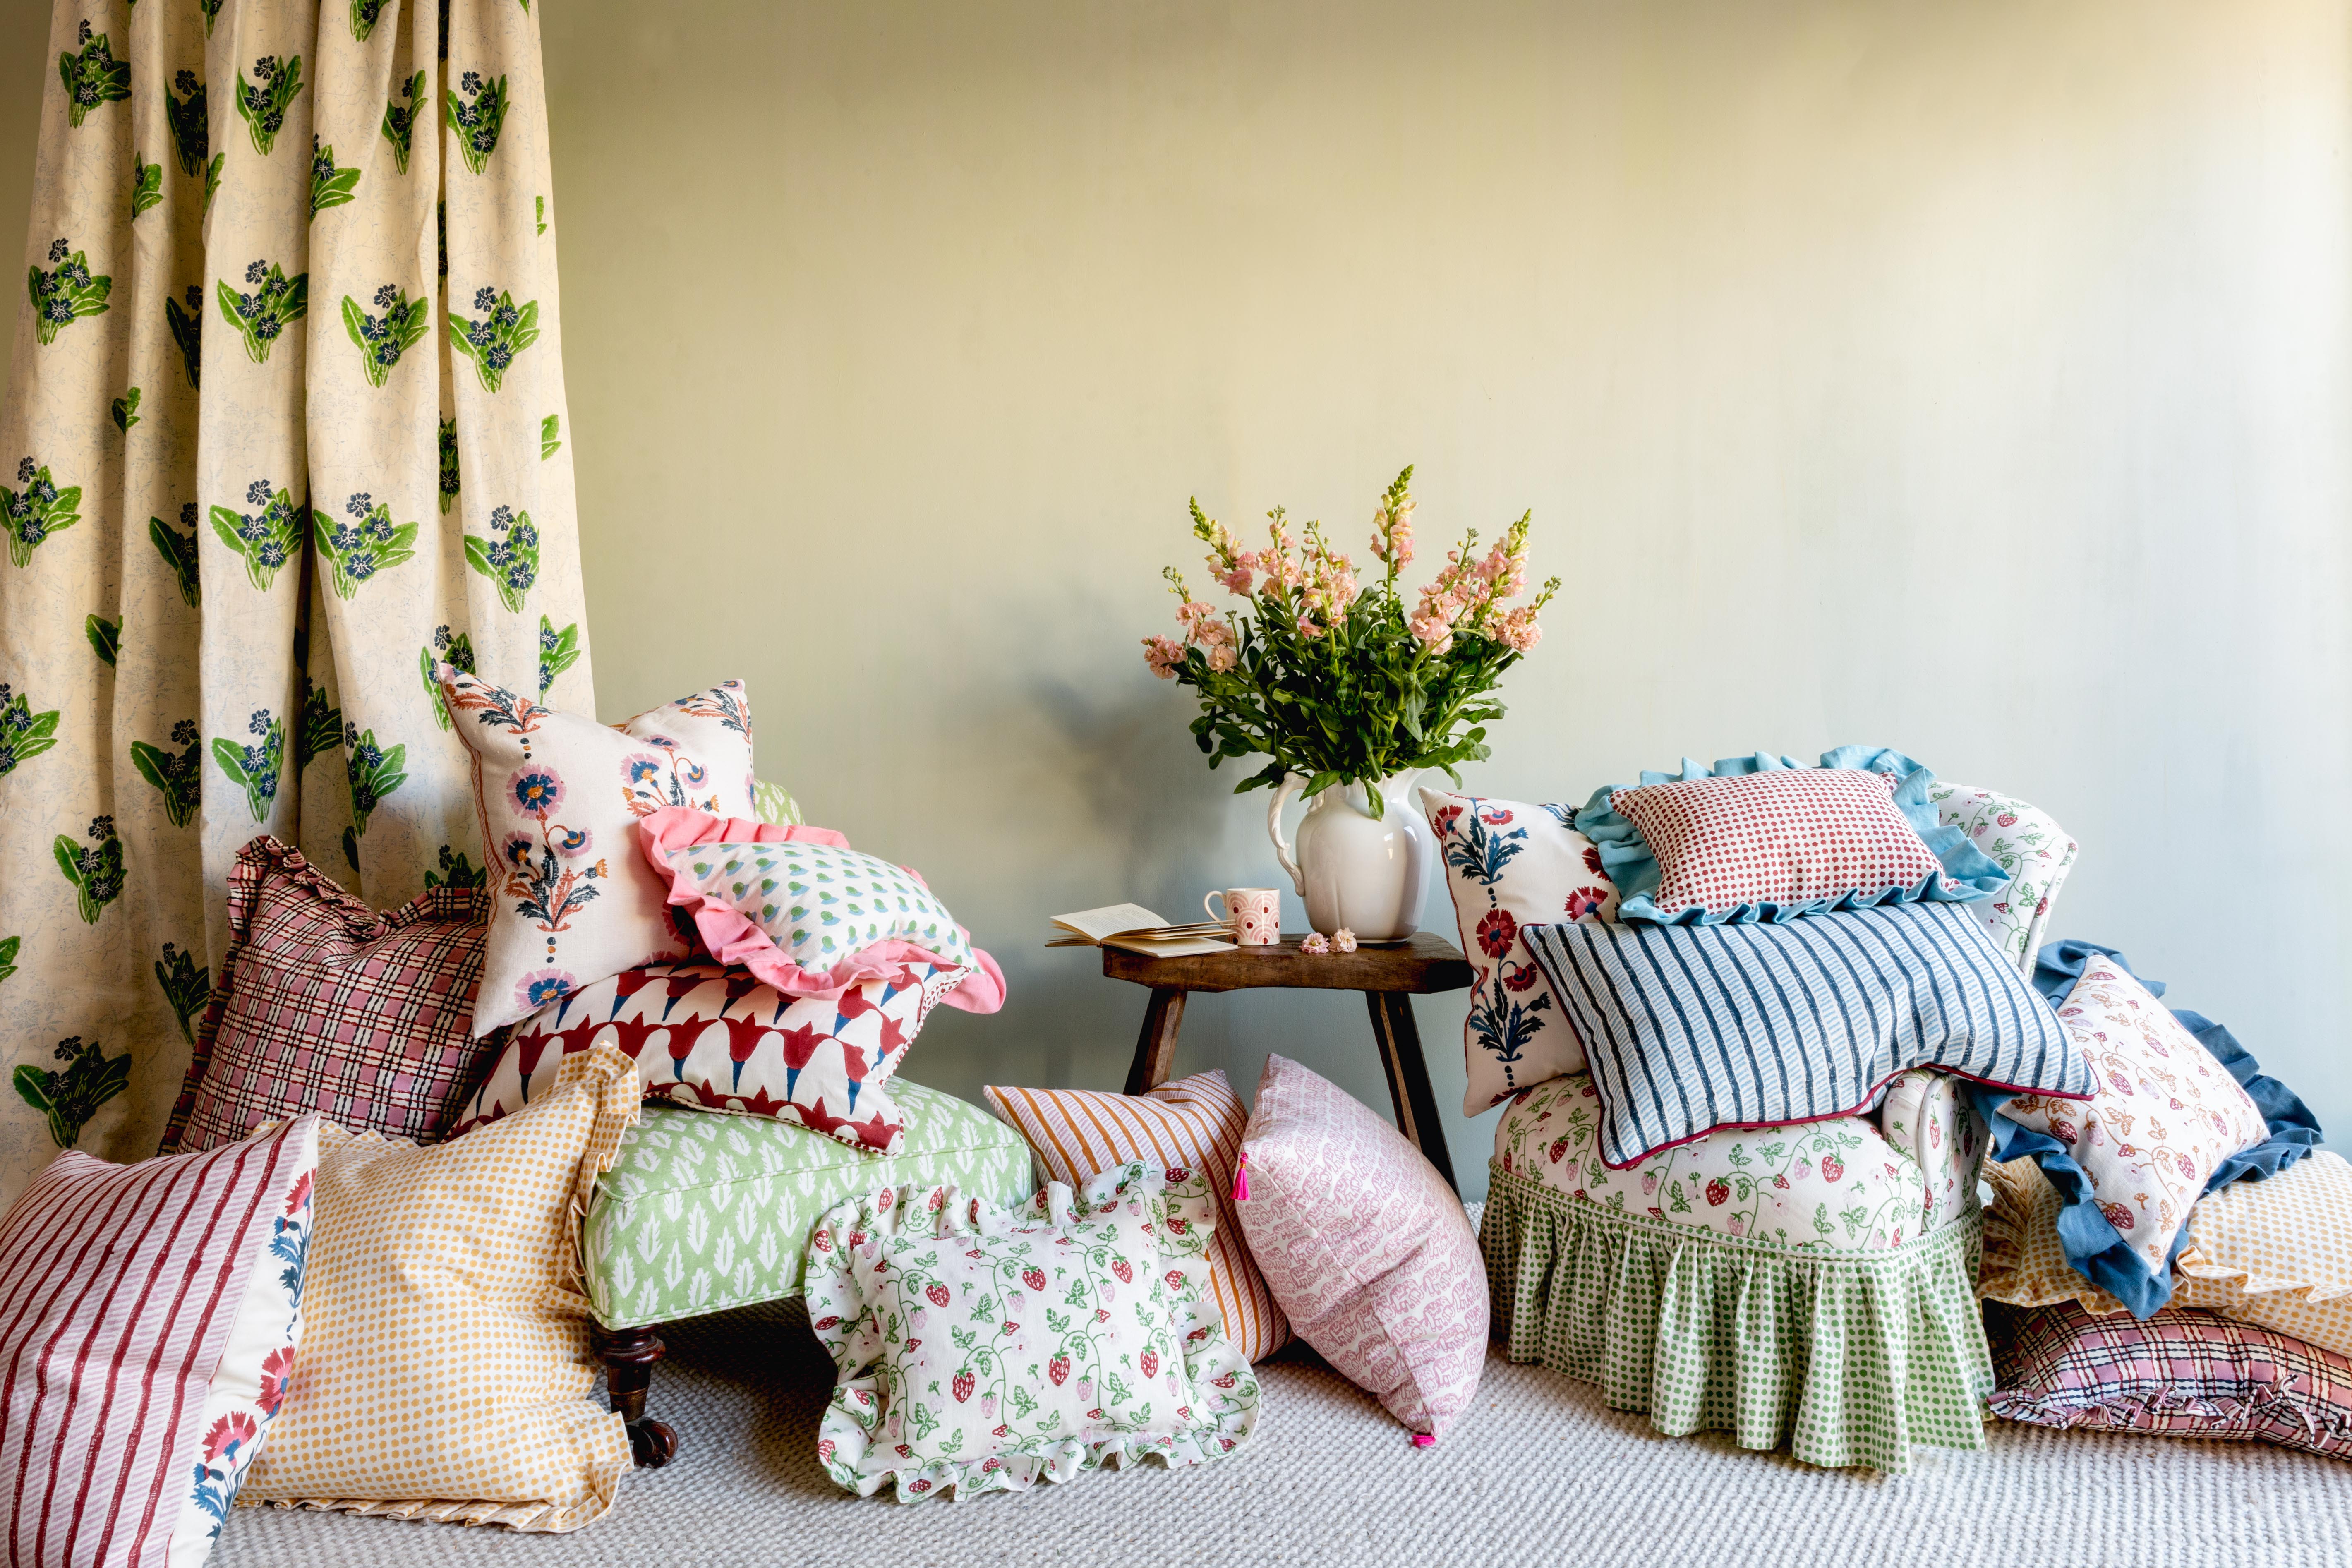 Molly Mahon’s cushions can liven up understated furniture